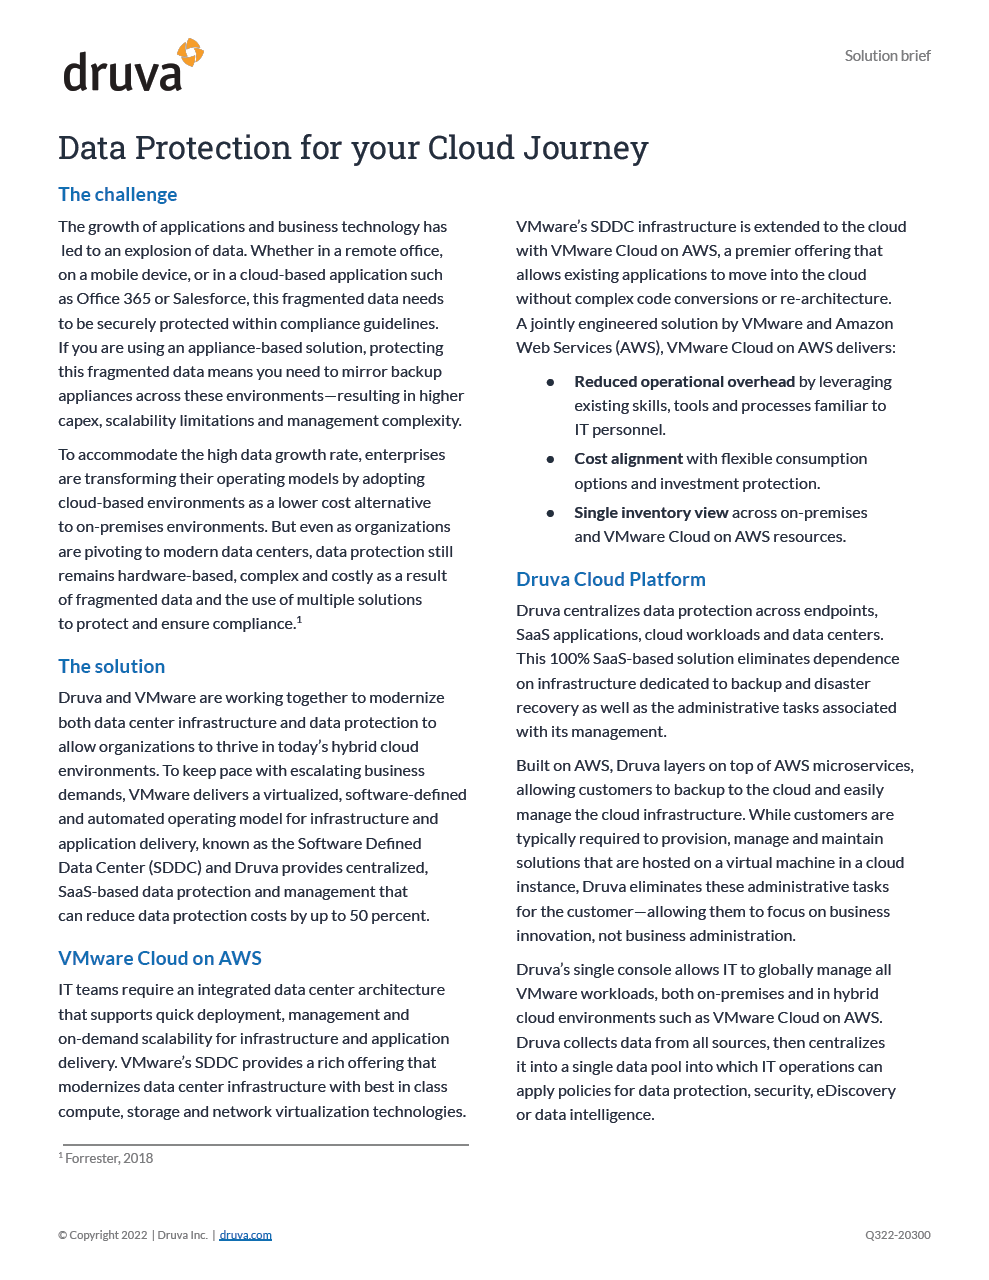 Data protection for your cloud journey